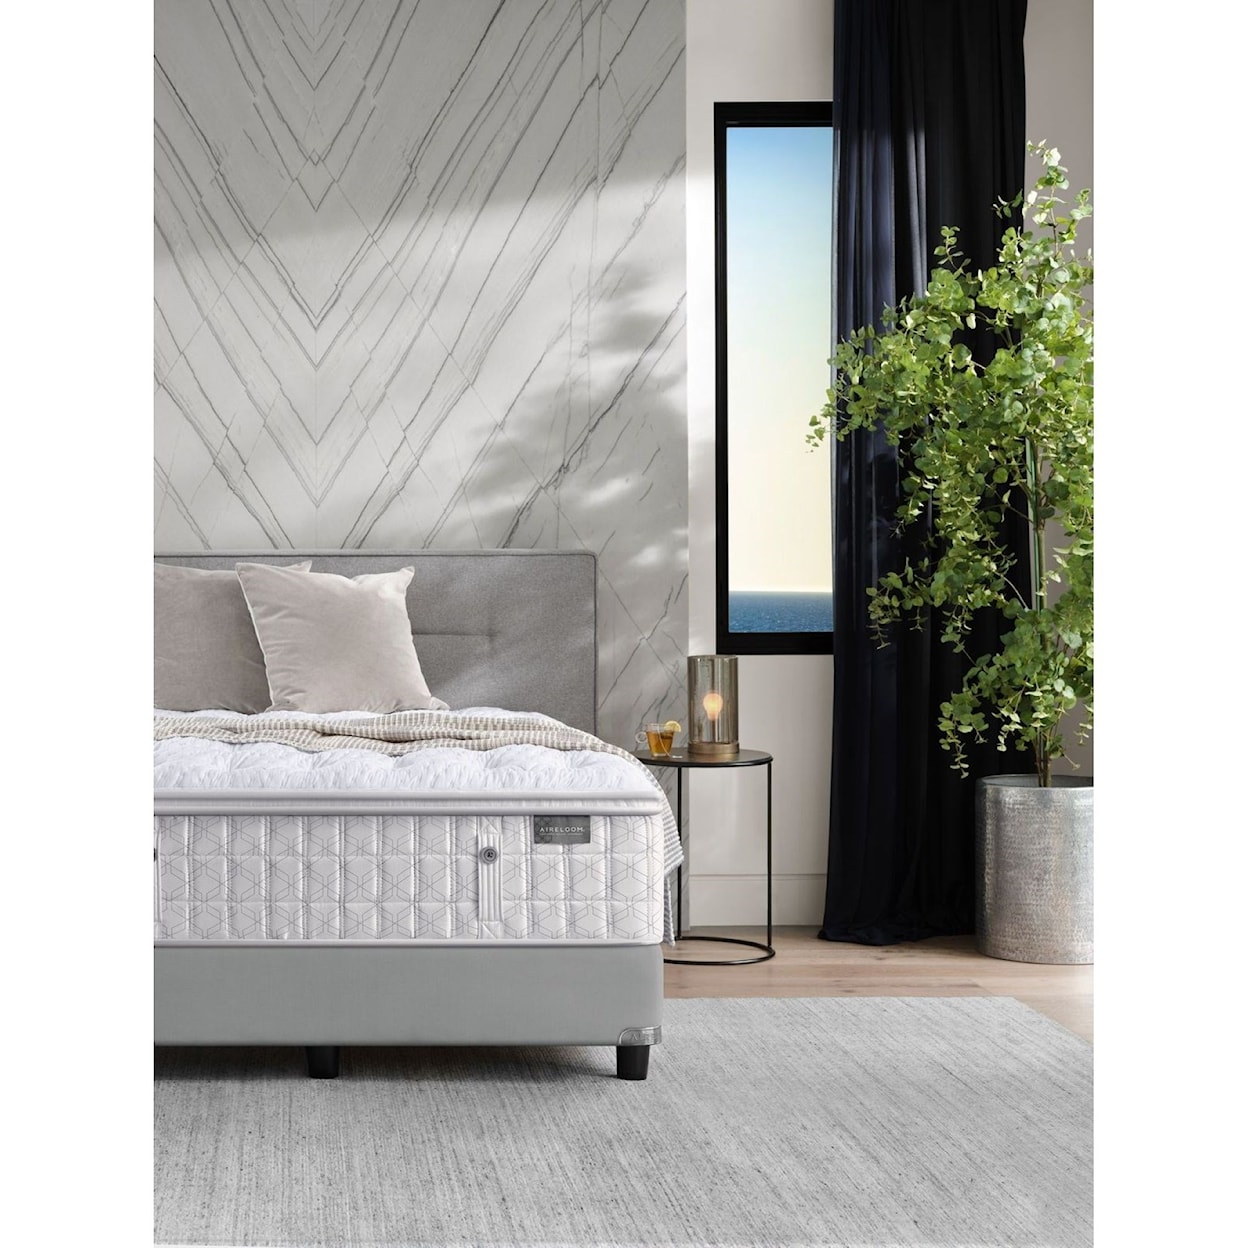 Aireloom Bedding Timeless Odyssey Luxetop Firm M2 Full Luxury Firm Mattress